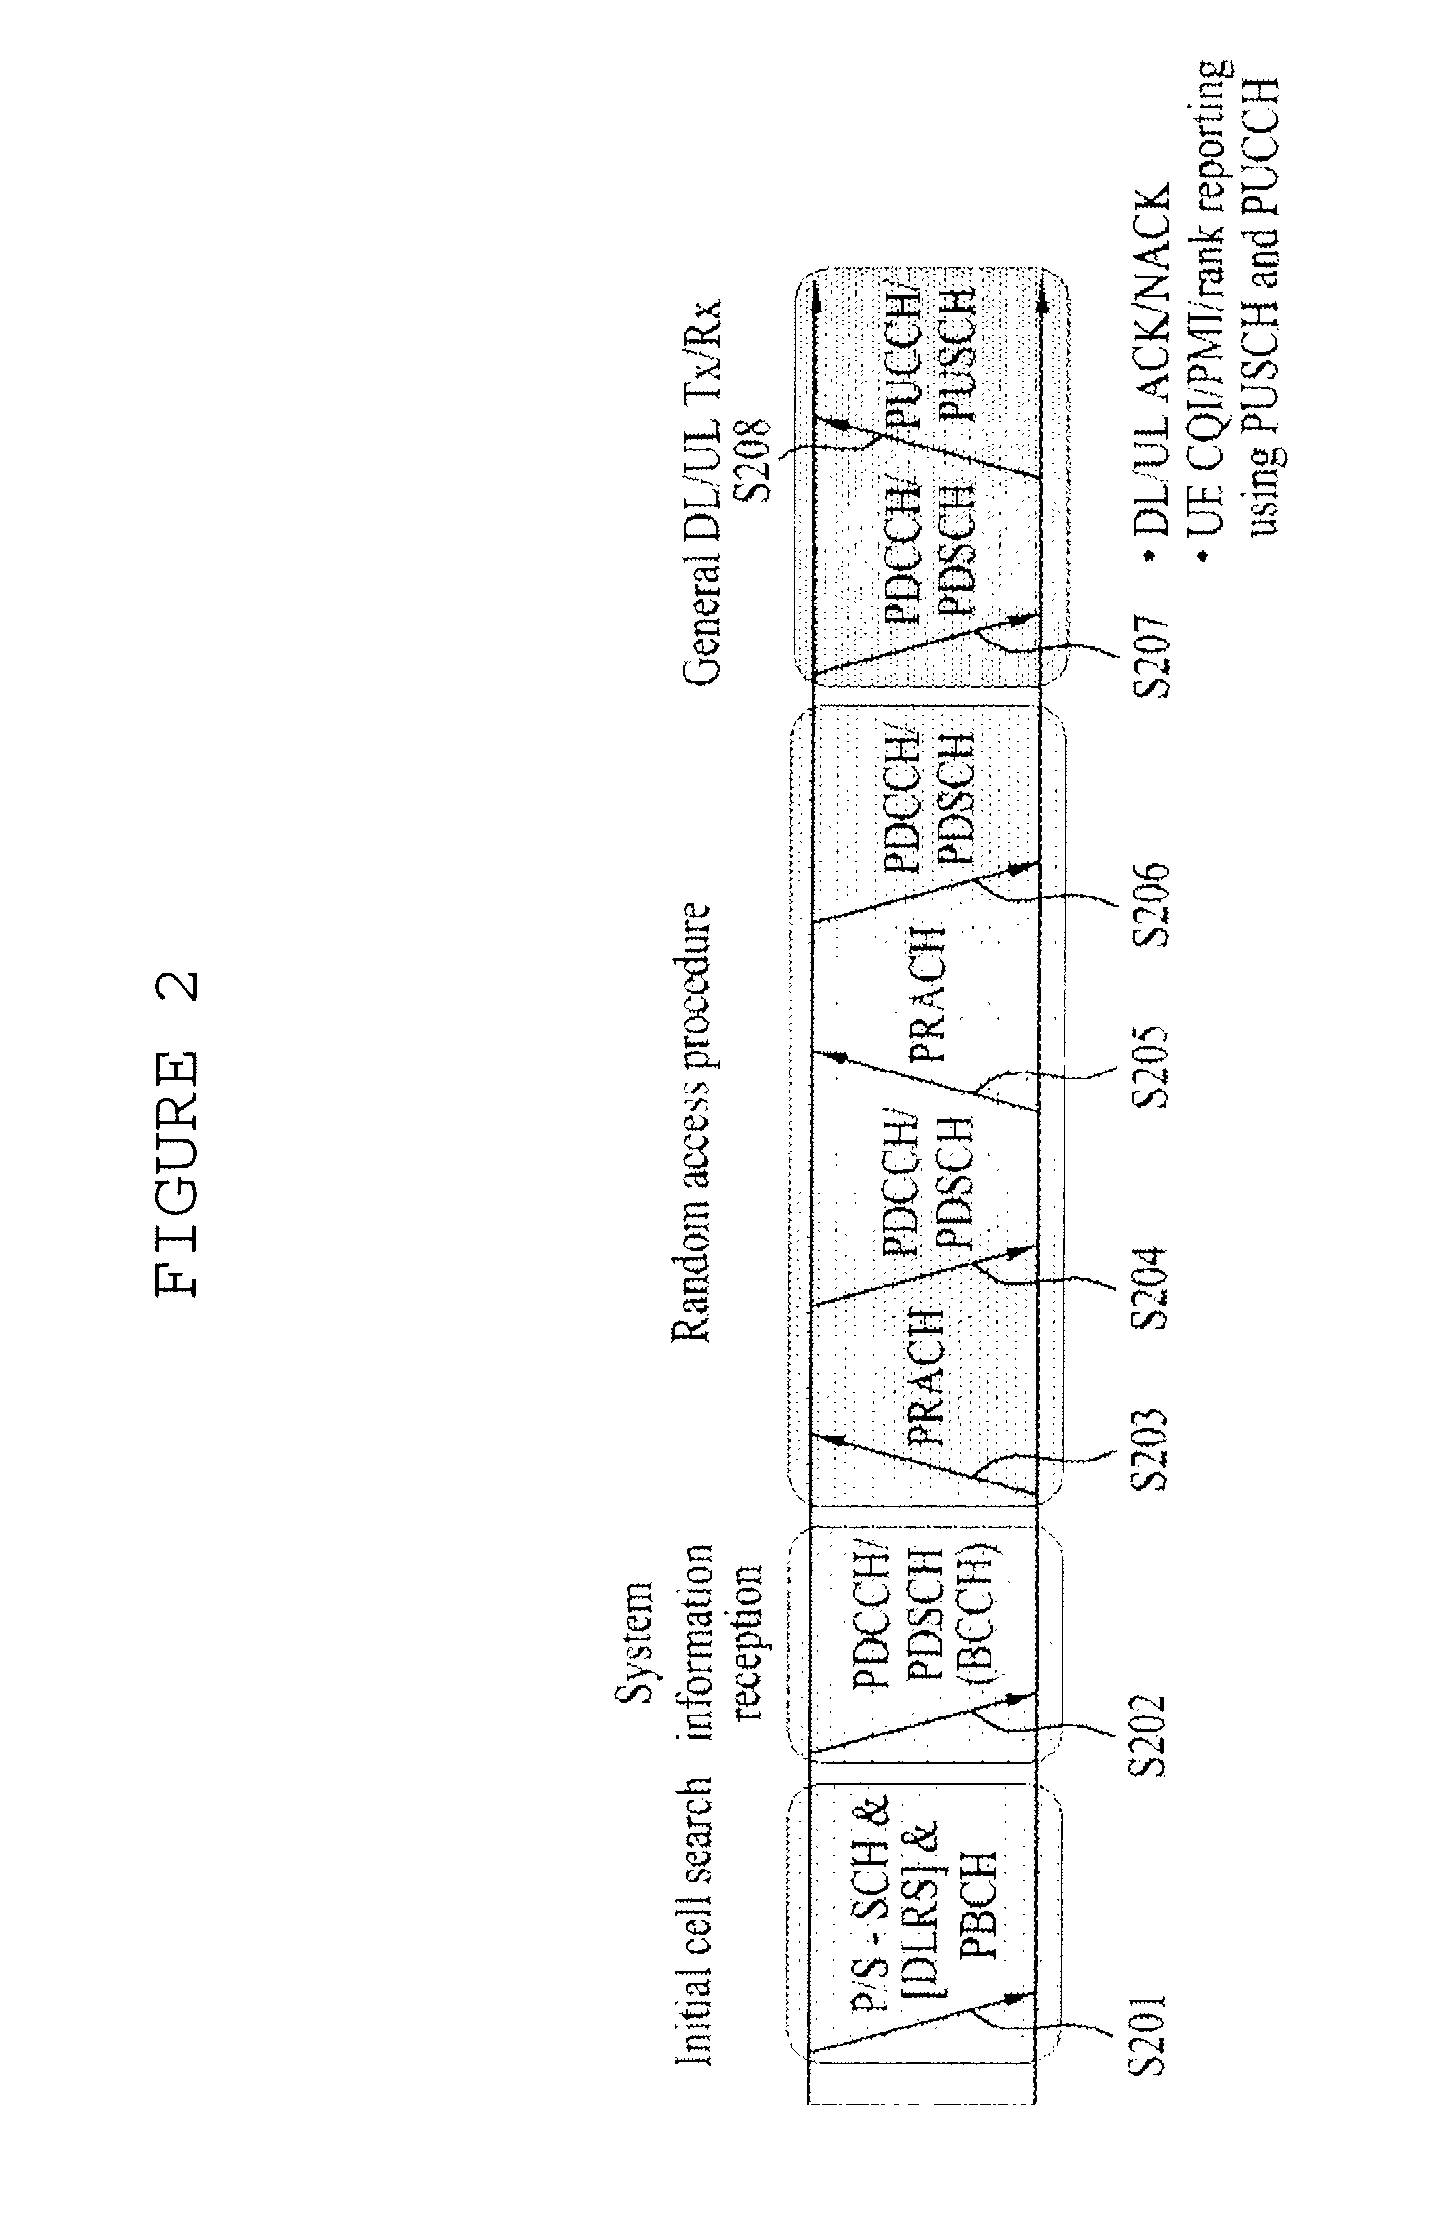 METHOD FOR PERFORMING CoMP OPERATION AND TRANSMITTING FEEDBACK INFORMATION IN A WIRELESS COMMUNICATION SYSTEM